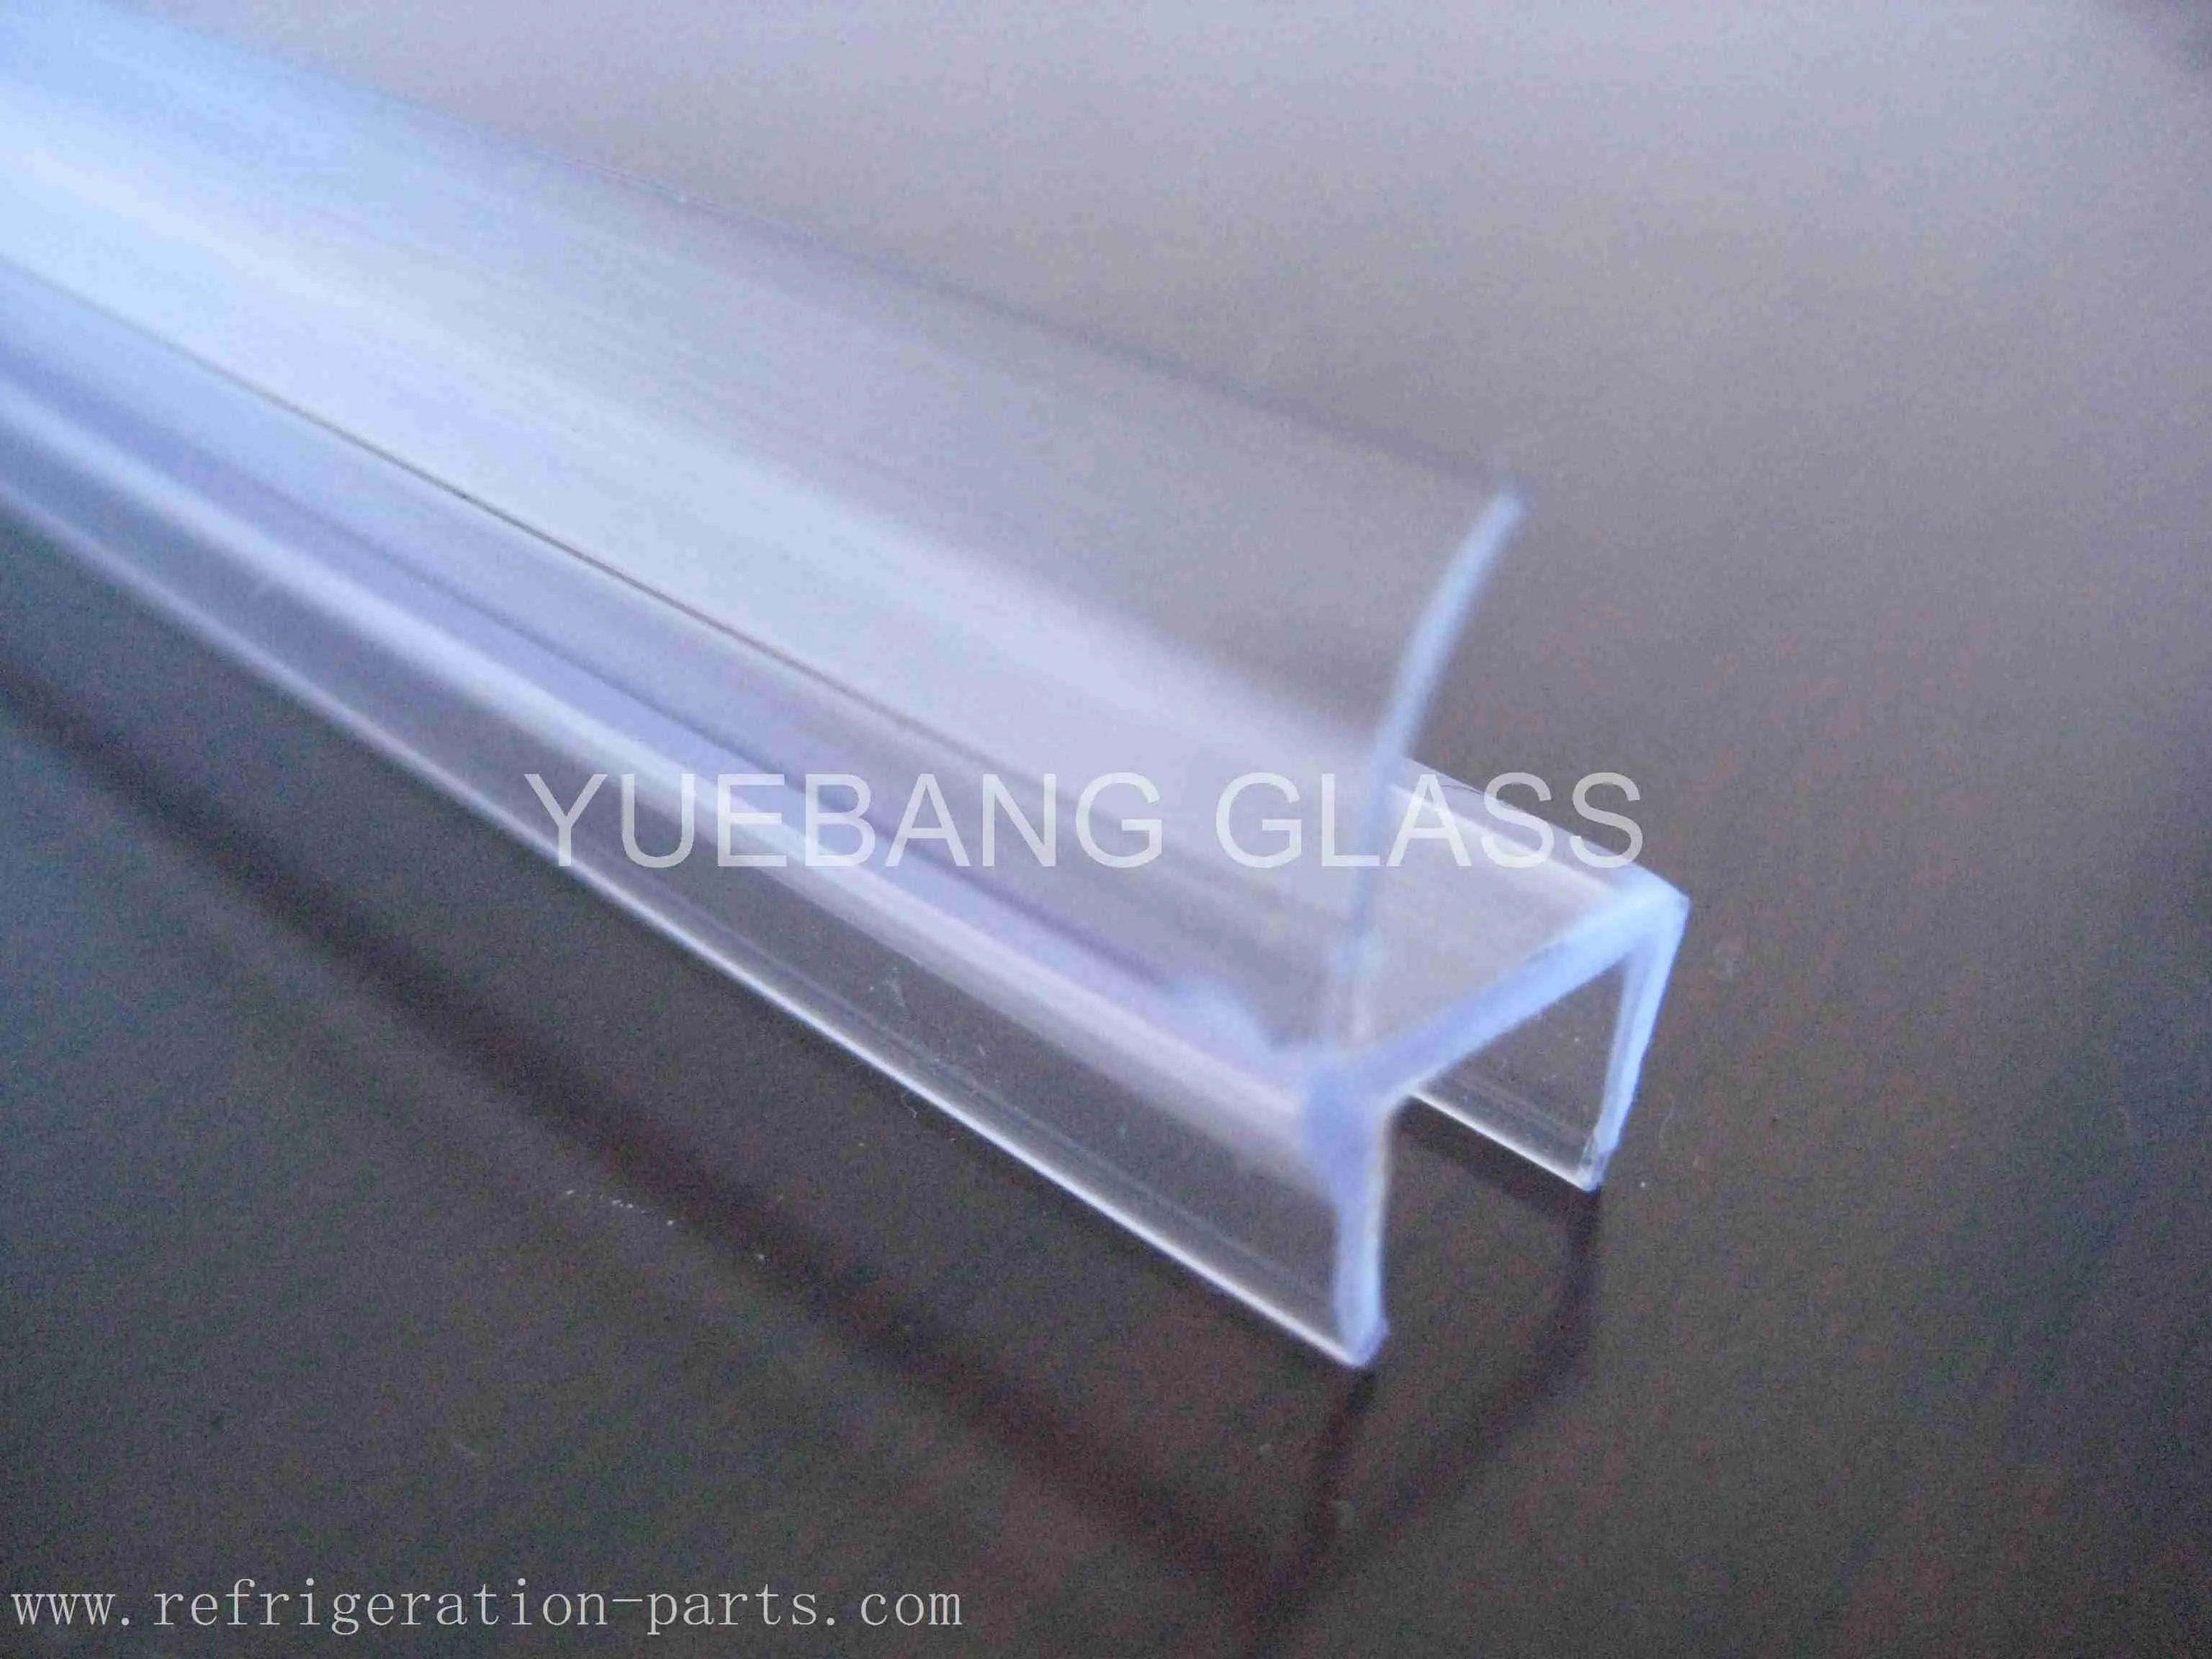 Quality PP/PVC Extrusion Profiles by Yuebang Glass - Premier Supplier & Manufacturer